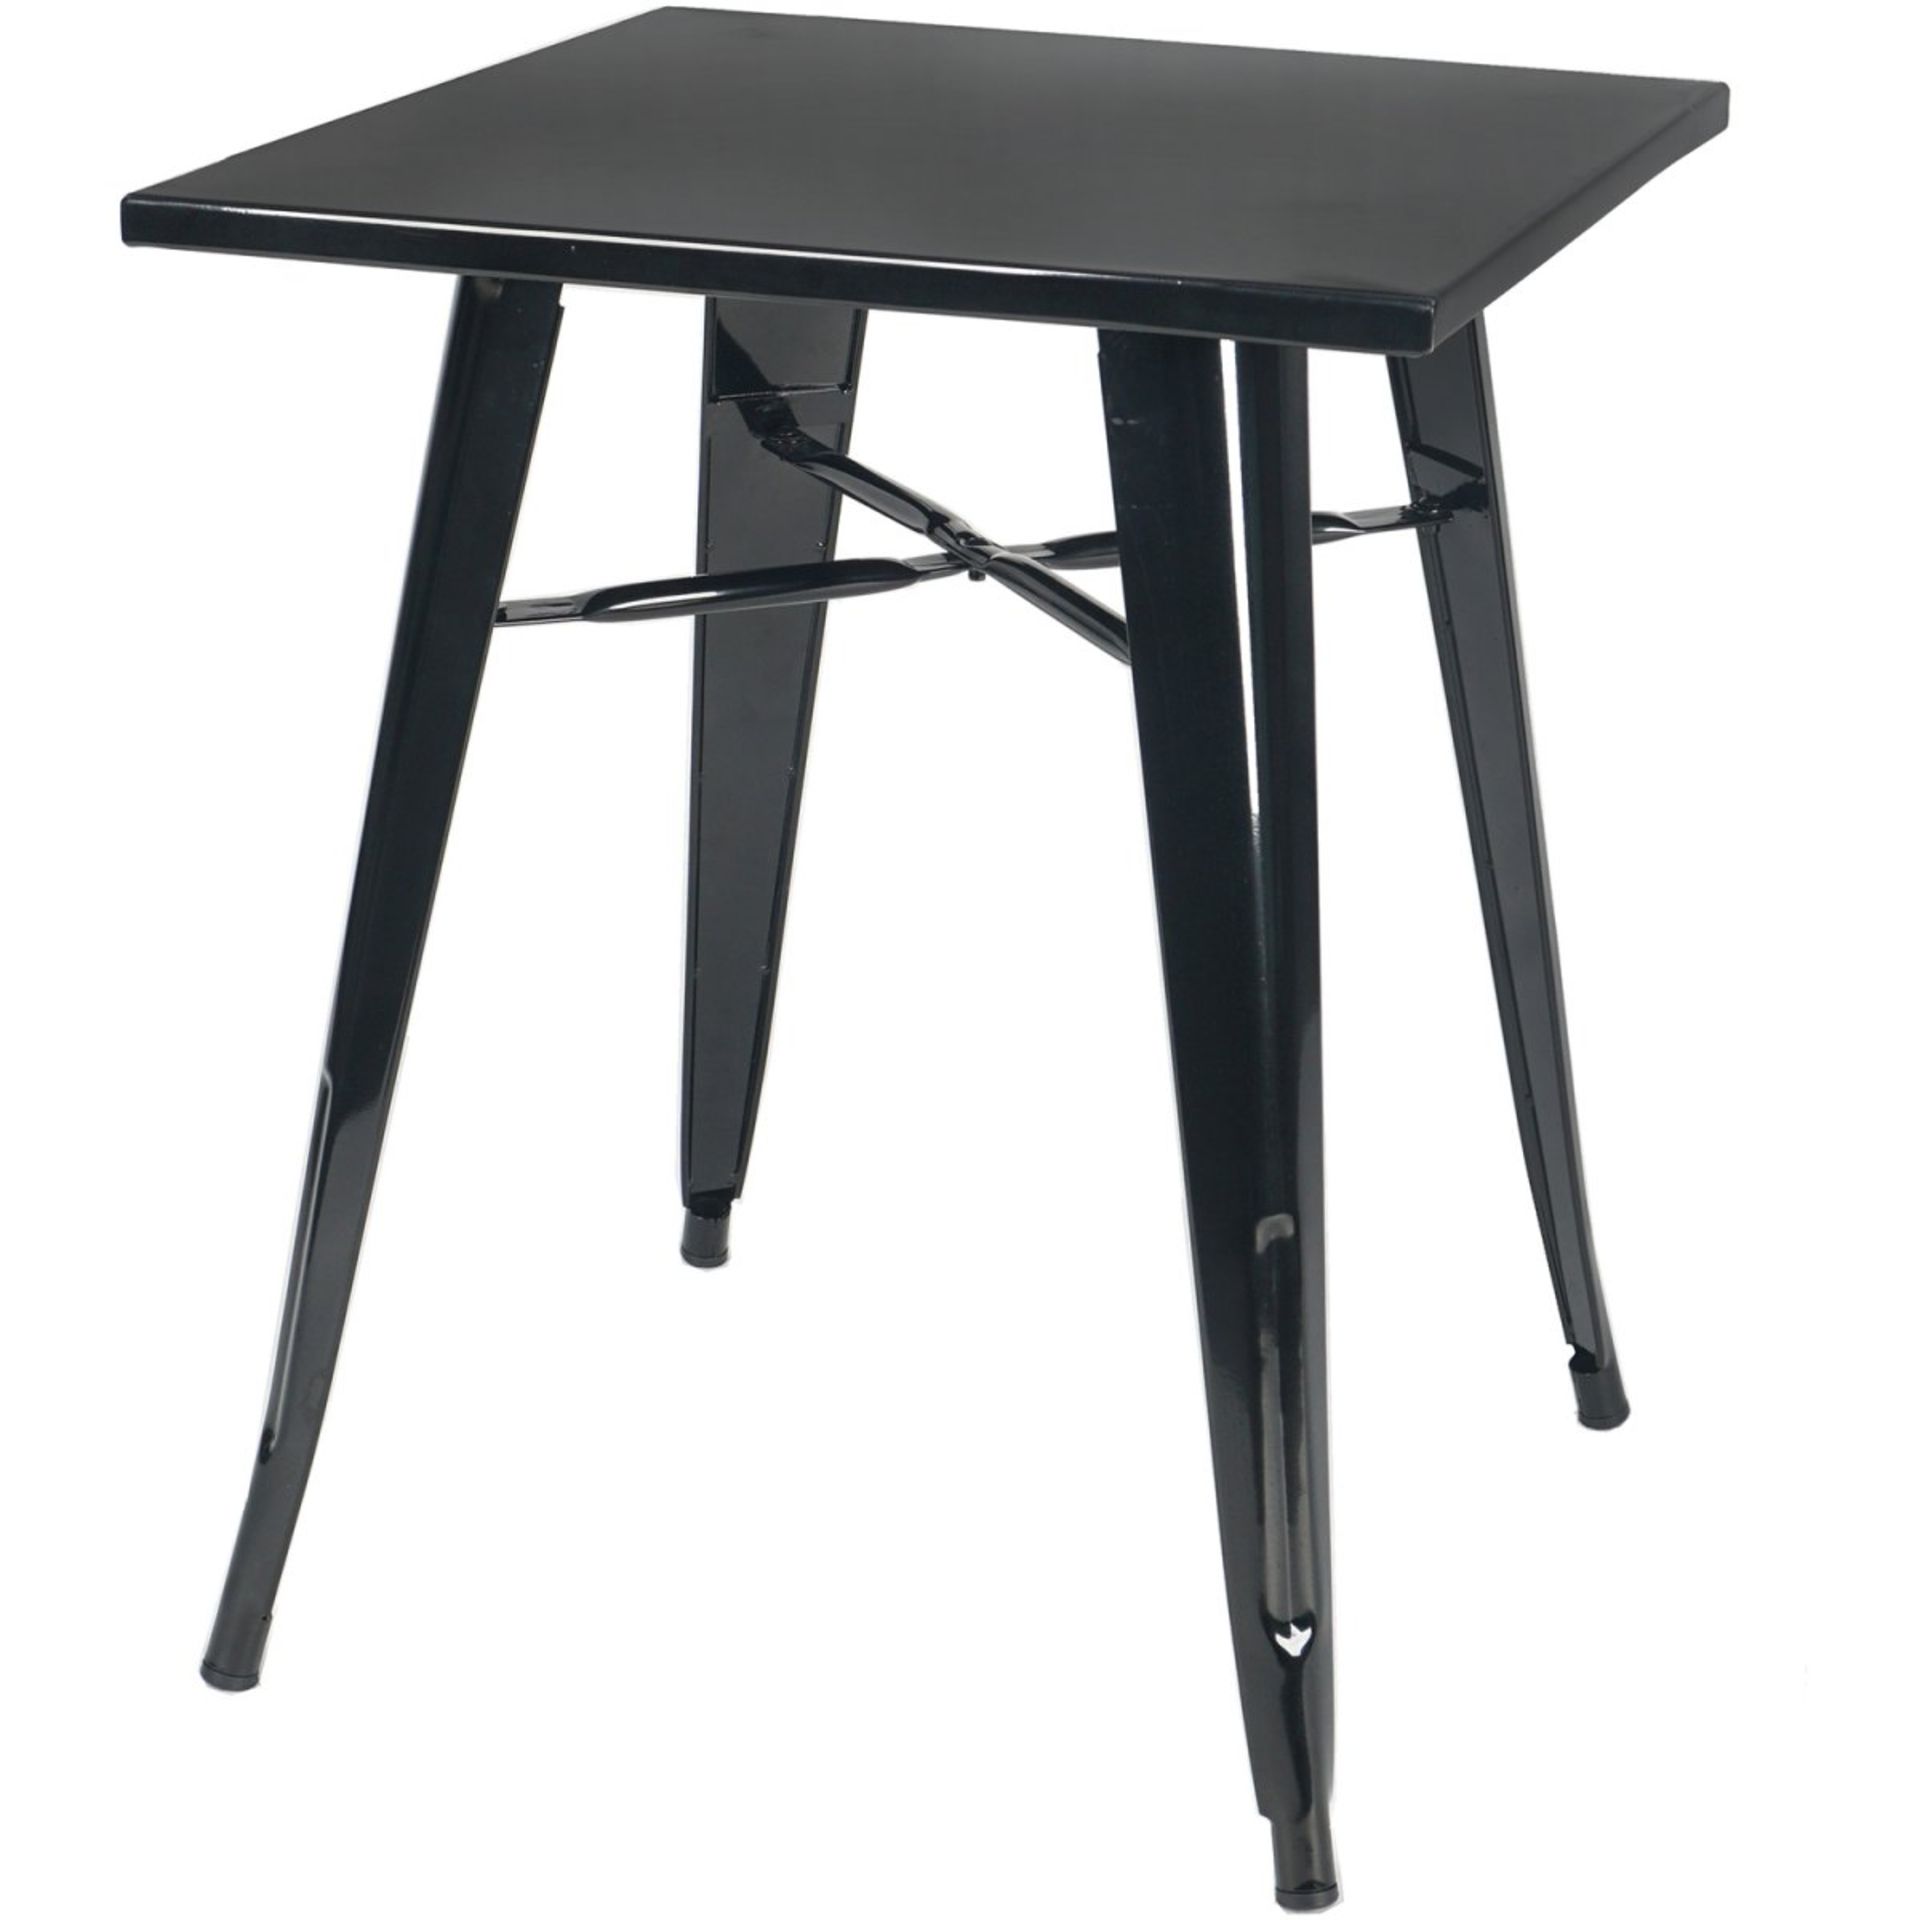 1 x Tolix Industrial Style Outdoor Bistro Table and Chair Set in Black - Includes 1 x Table and 4 - Image 6 of 6